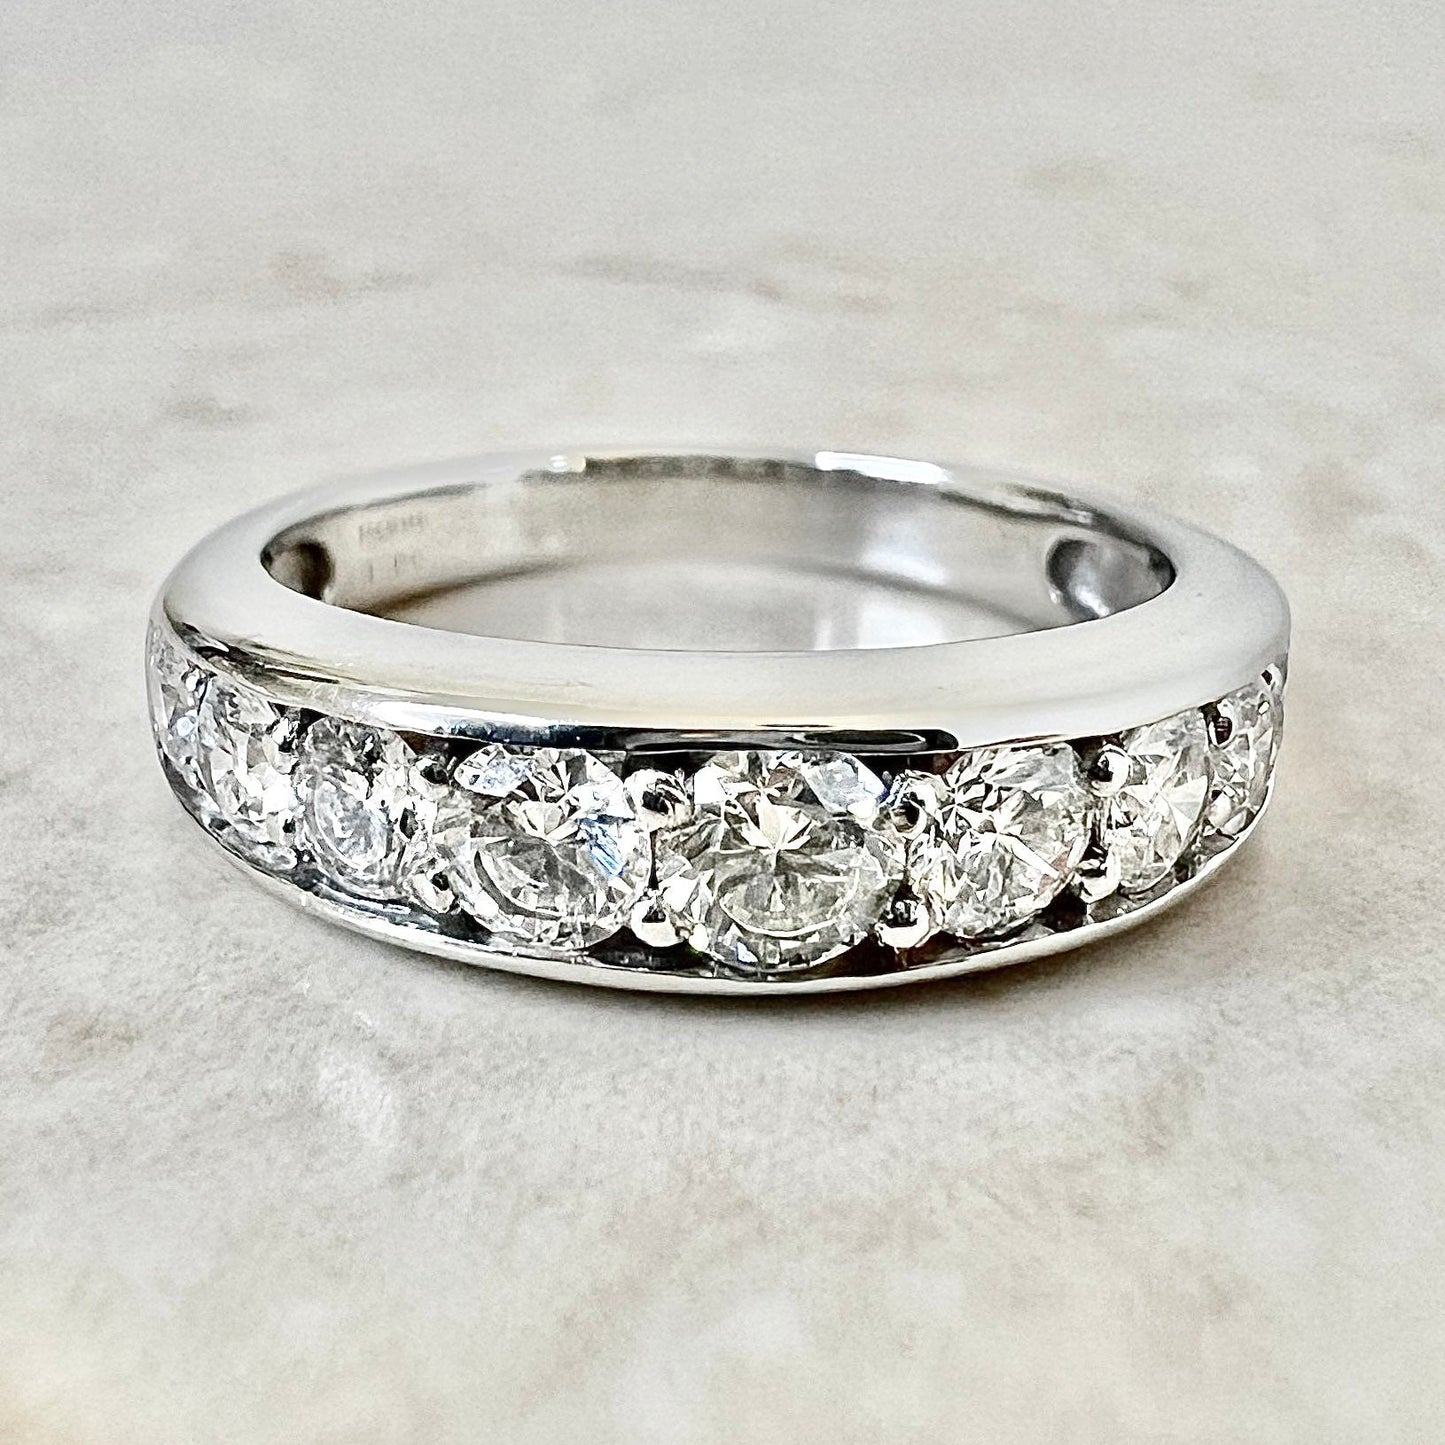 1 CT Vintage Platinum Half Eternity Diamond Band Ring - Platinum Eternity Ring - Diamond Ring - Anniversary Ring -Wedding Ring-Gifts For Her